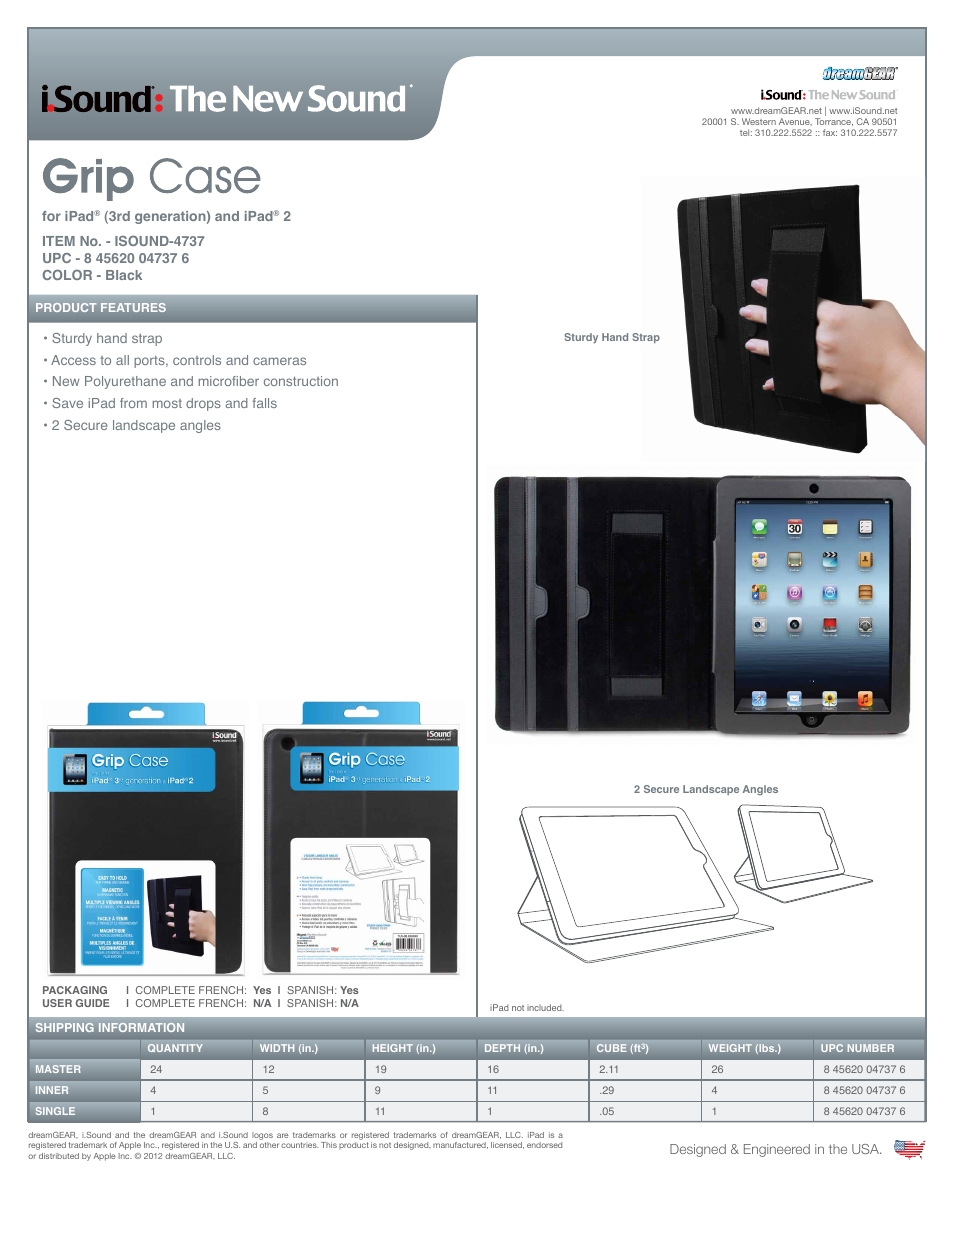 Grip Case for iPad2-3-4th generation - Sell Sheet